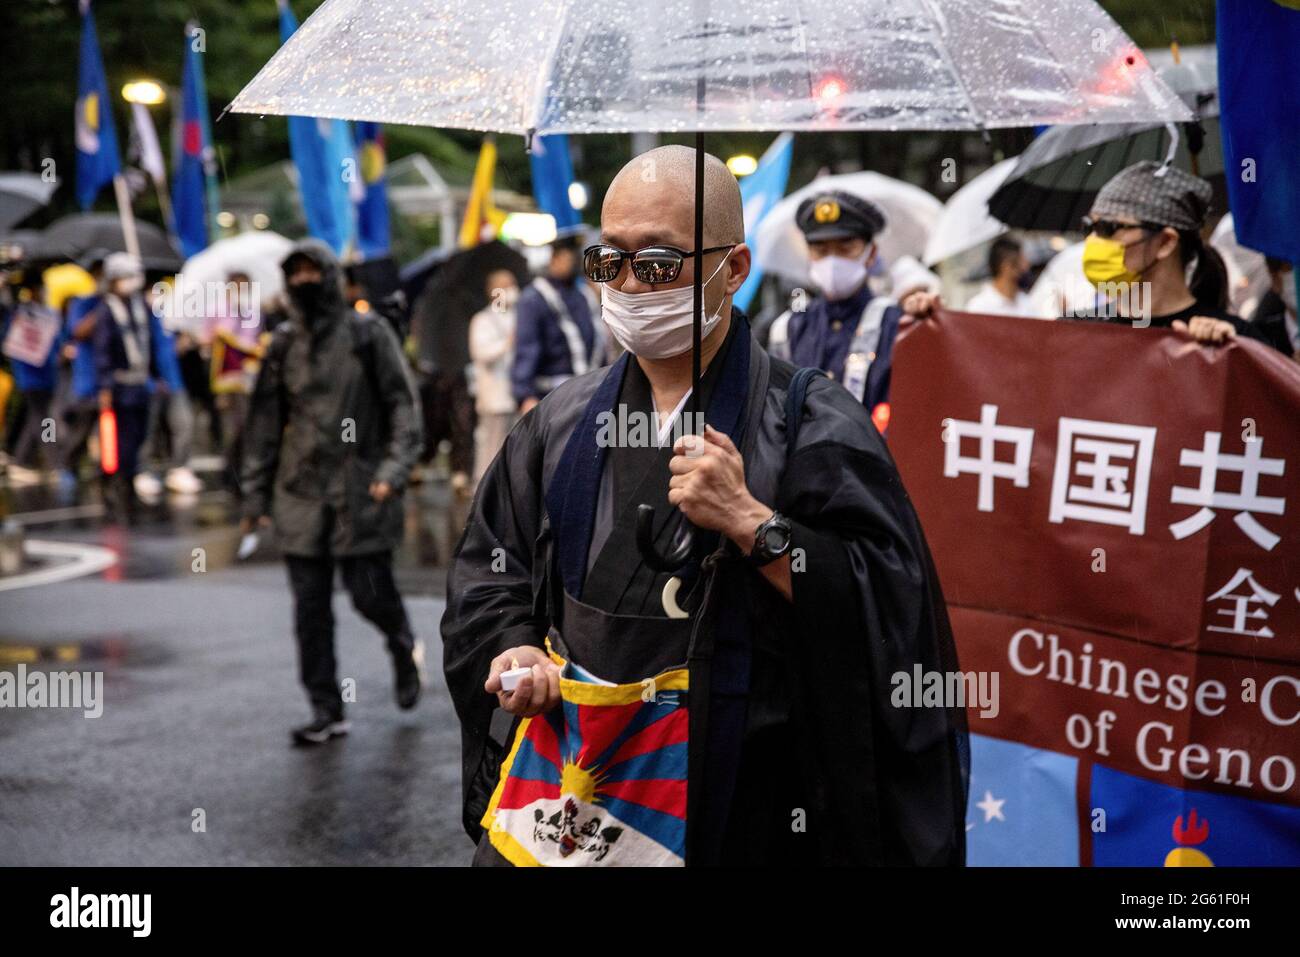 Tokyo, Japan. 01st July, 2021. A monk with the Tibet flag holding an umbrella, during the demonstration.1st of July marks the 100th anniversary of the founding of the CCP (Chinese Communist Party) and the 24th anniversary of Hong Kong's handover to China. CCP supporters took to the street to celebrate while pro democracy Hong Kong protestors also march through the capital city to express their politic stands. Credit: SOPA Images Limited/Alamy Live News Stock Photo